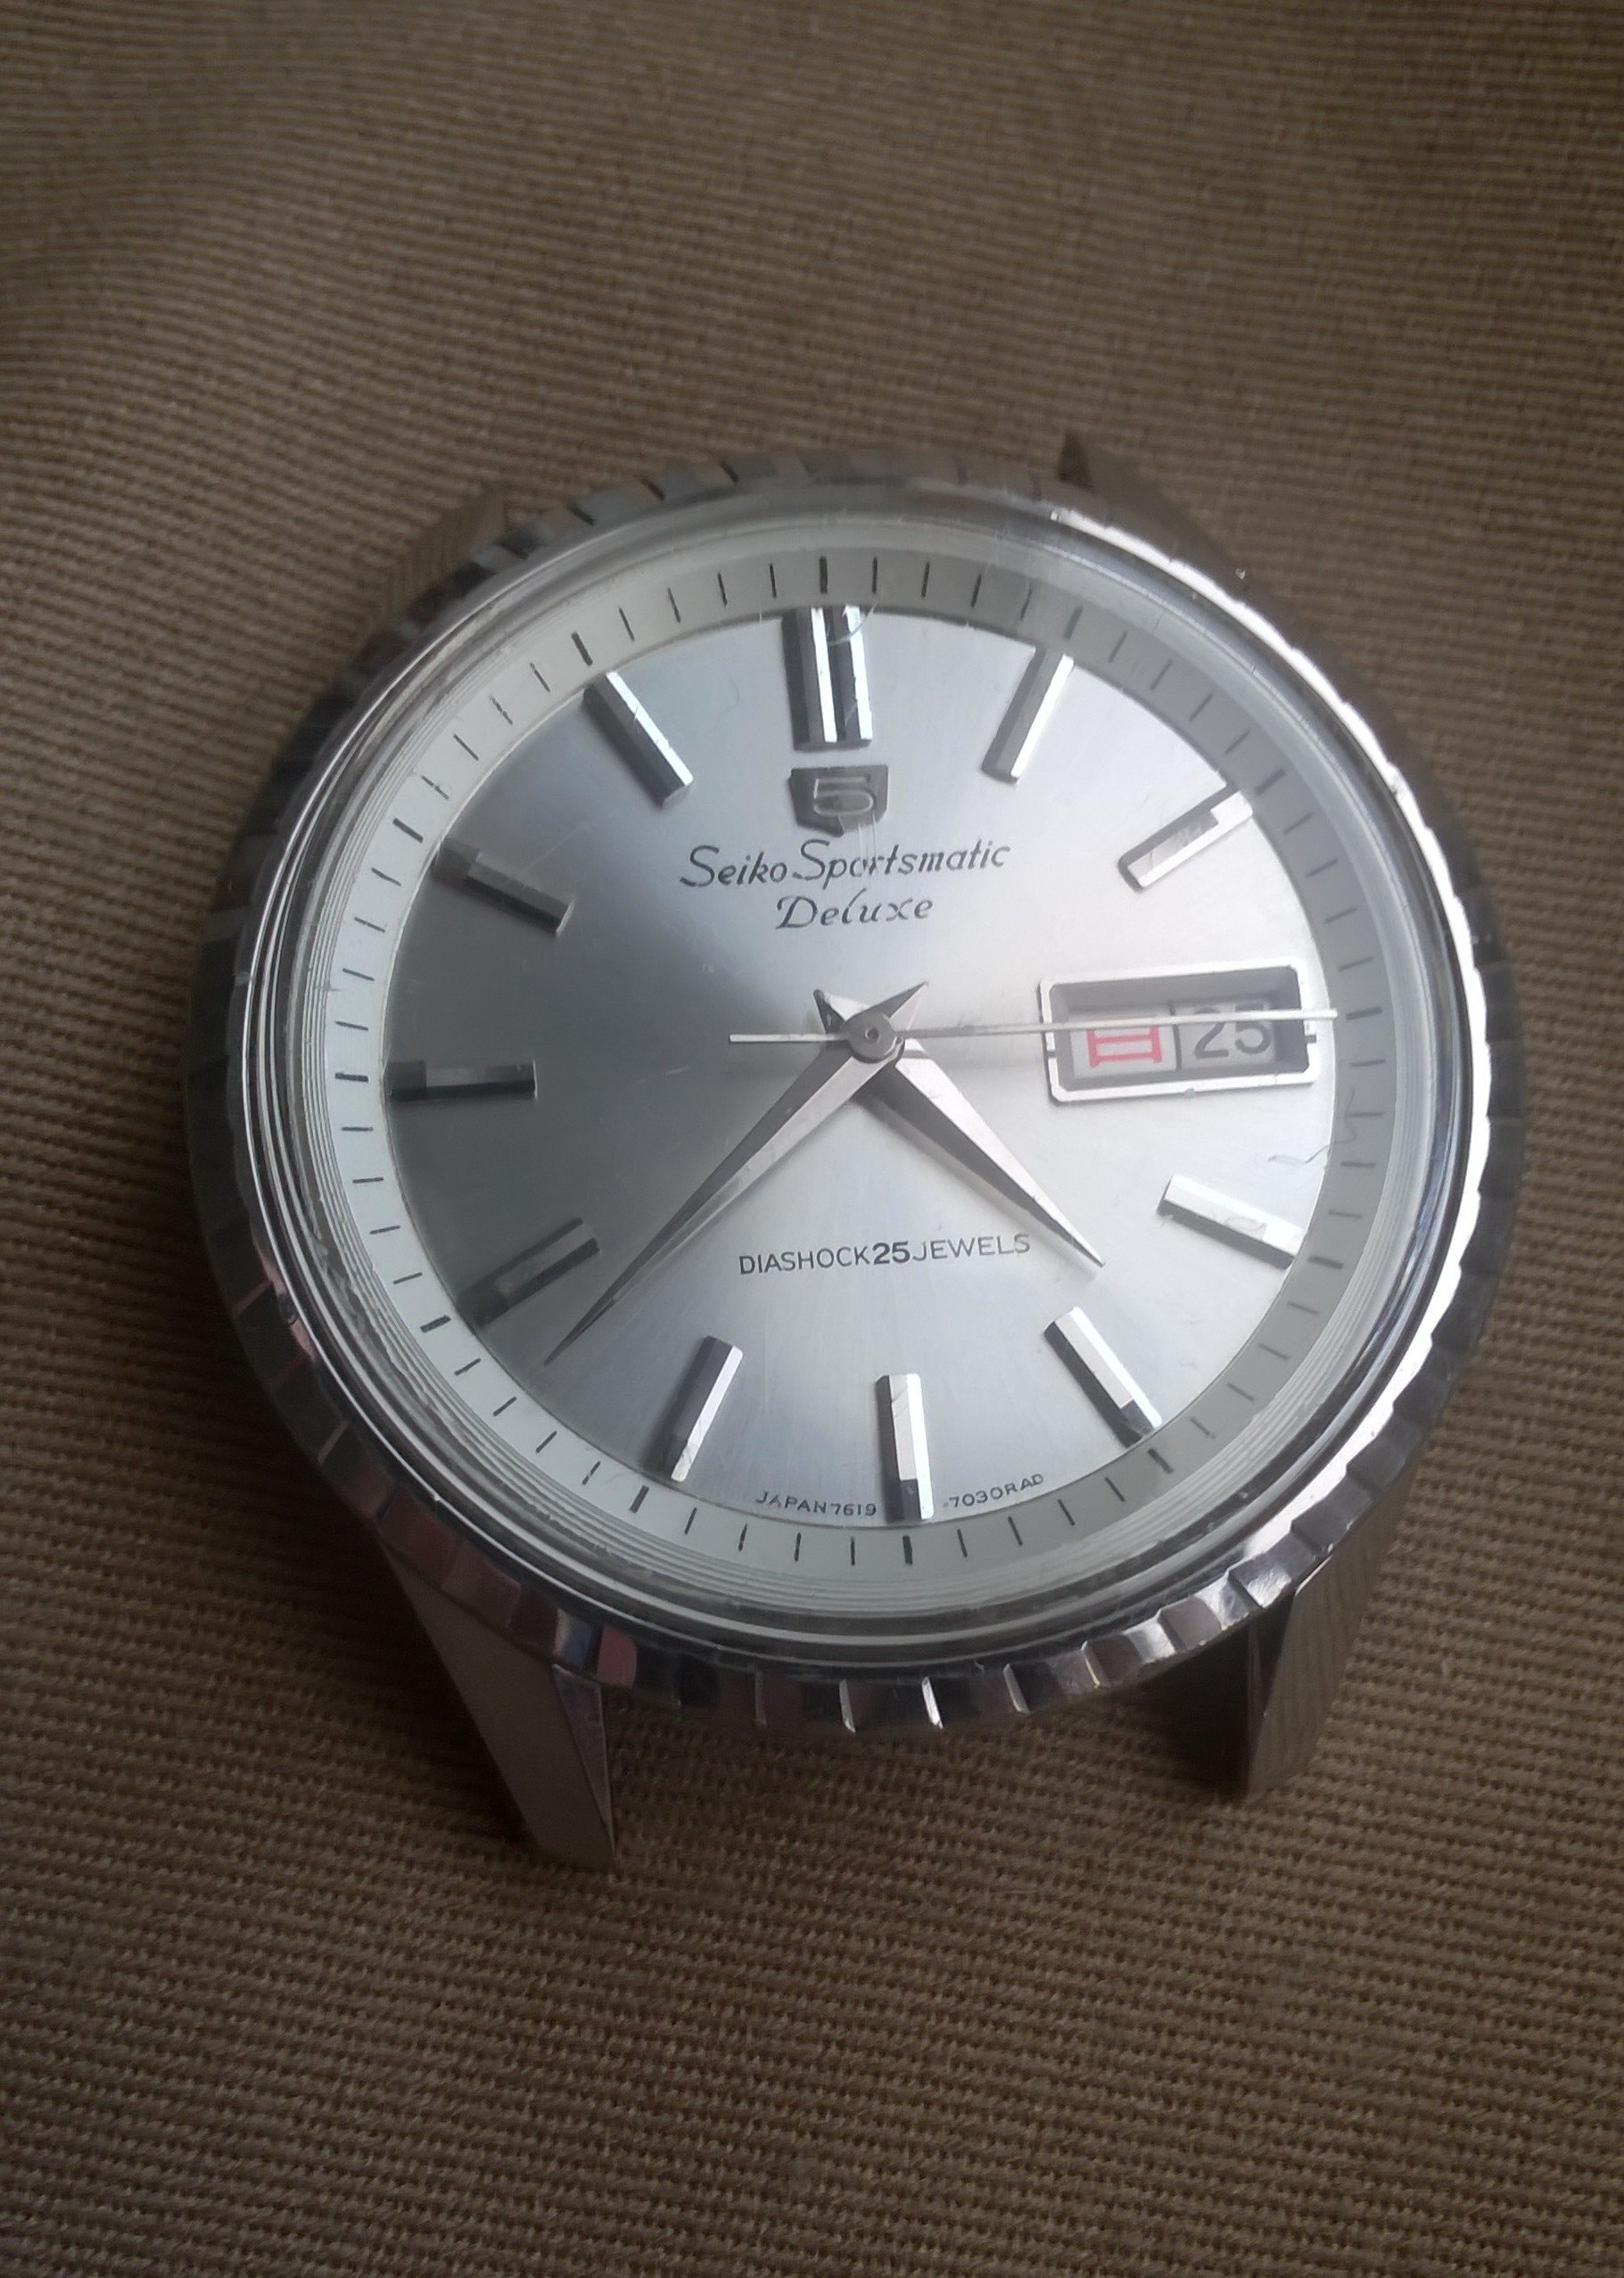 FS: Seiko 5 Sportsmatic Deluxe 7619-7050 €80 | The Watch Site